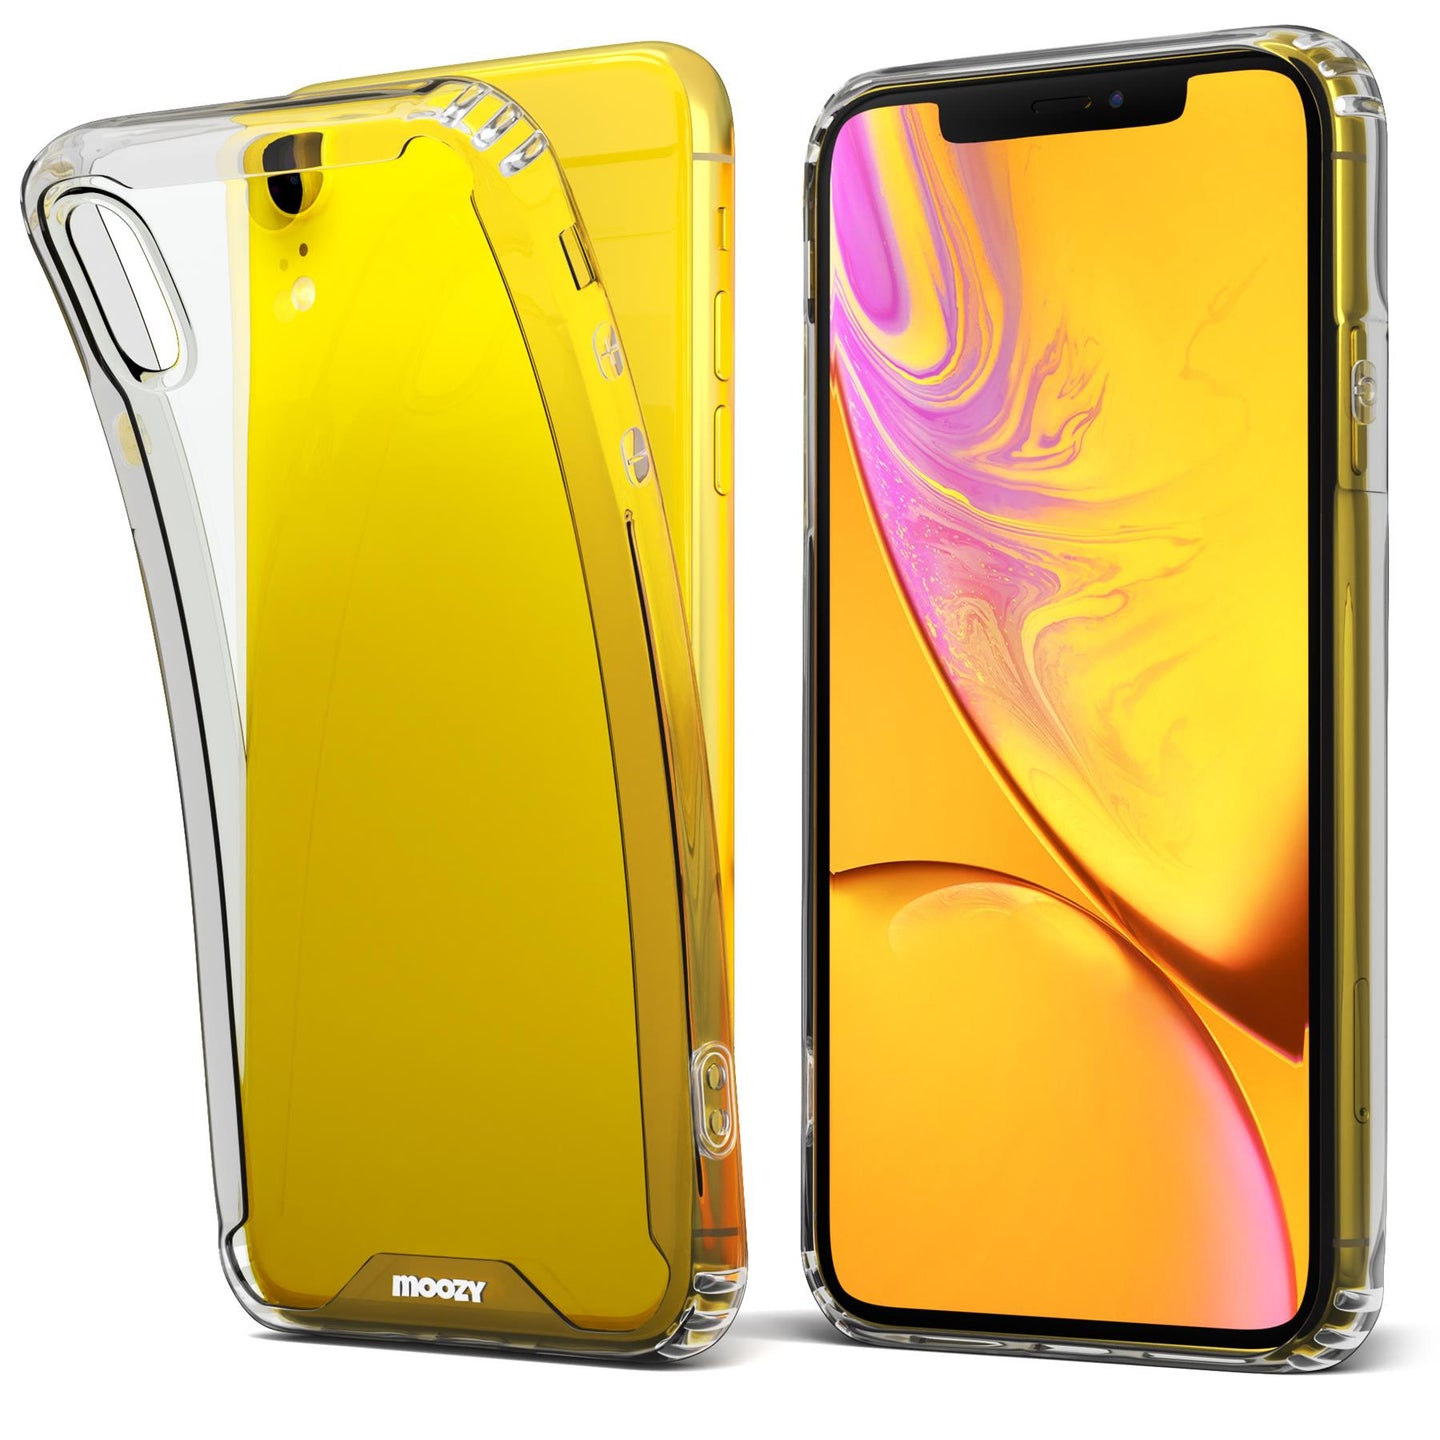 Moozy Xframe Shockproof Case for iPhone XR - Transparent Rim Case, Double Colour Clear Hybrid Cover with Shock Absorbing TPU Rim